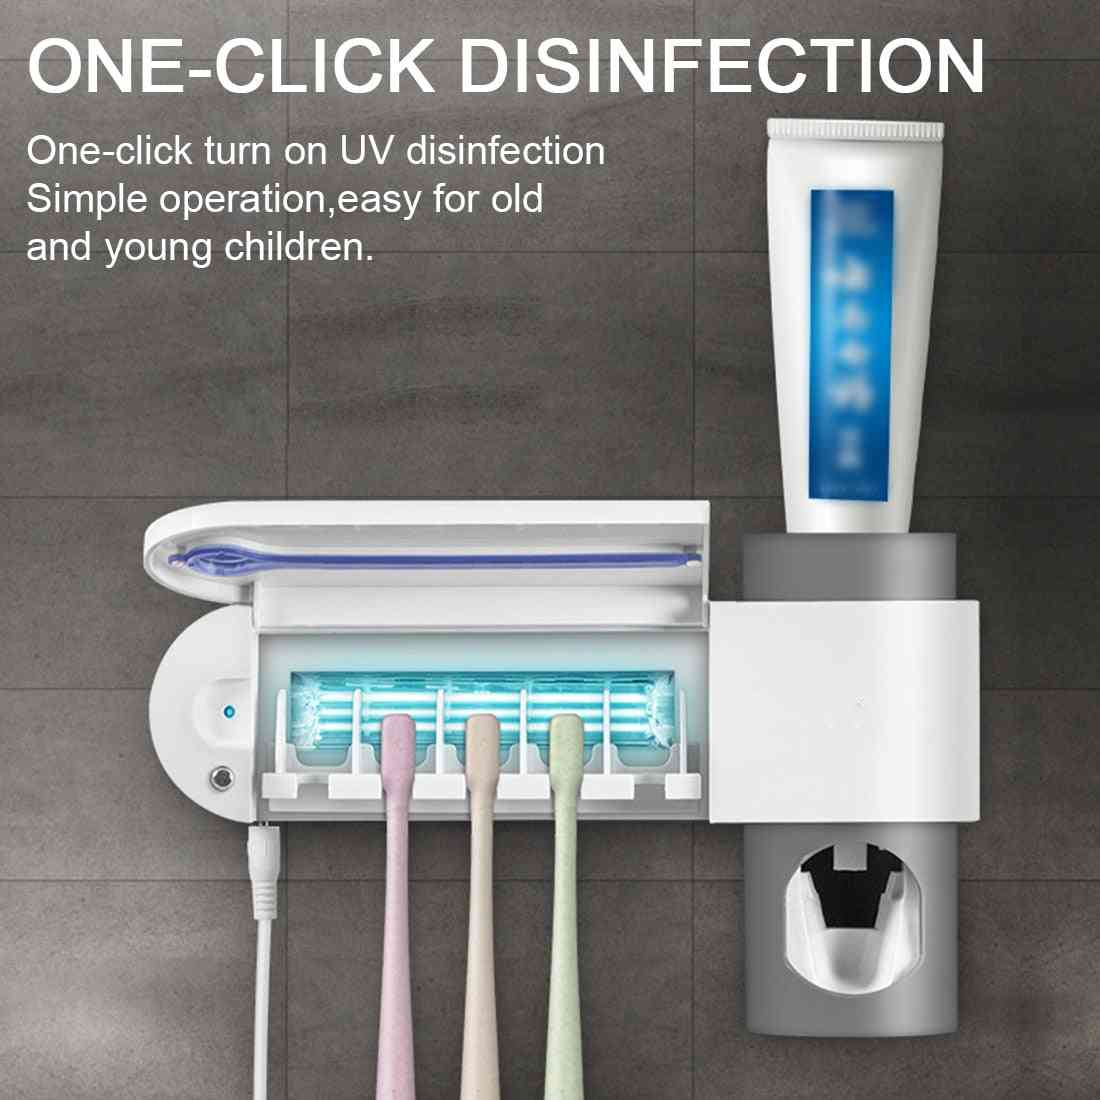 2-in-1 Uv Light, Toothbrush Holder- Automatic Toothpaste, Squeezers Dispenser Accessories